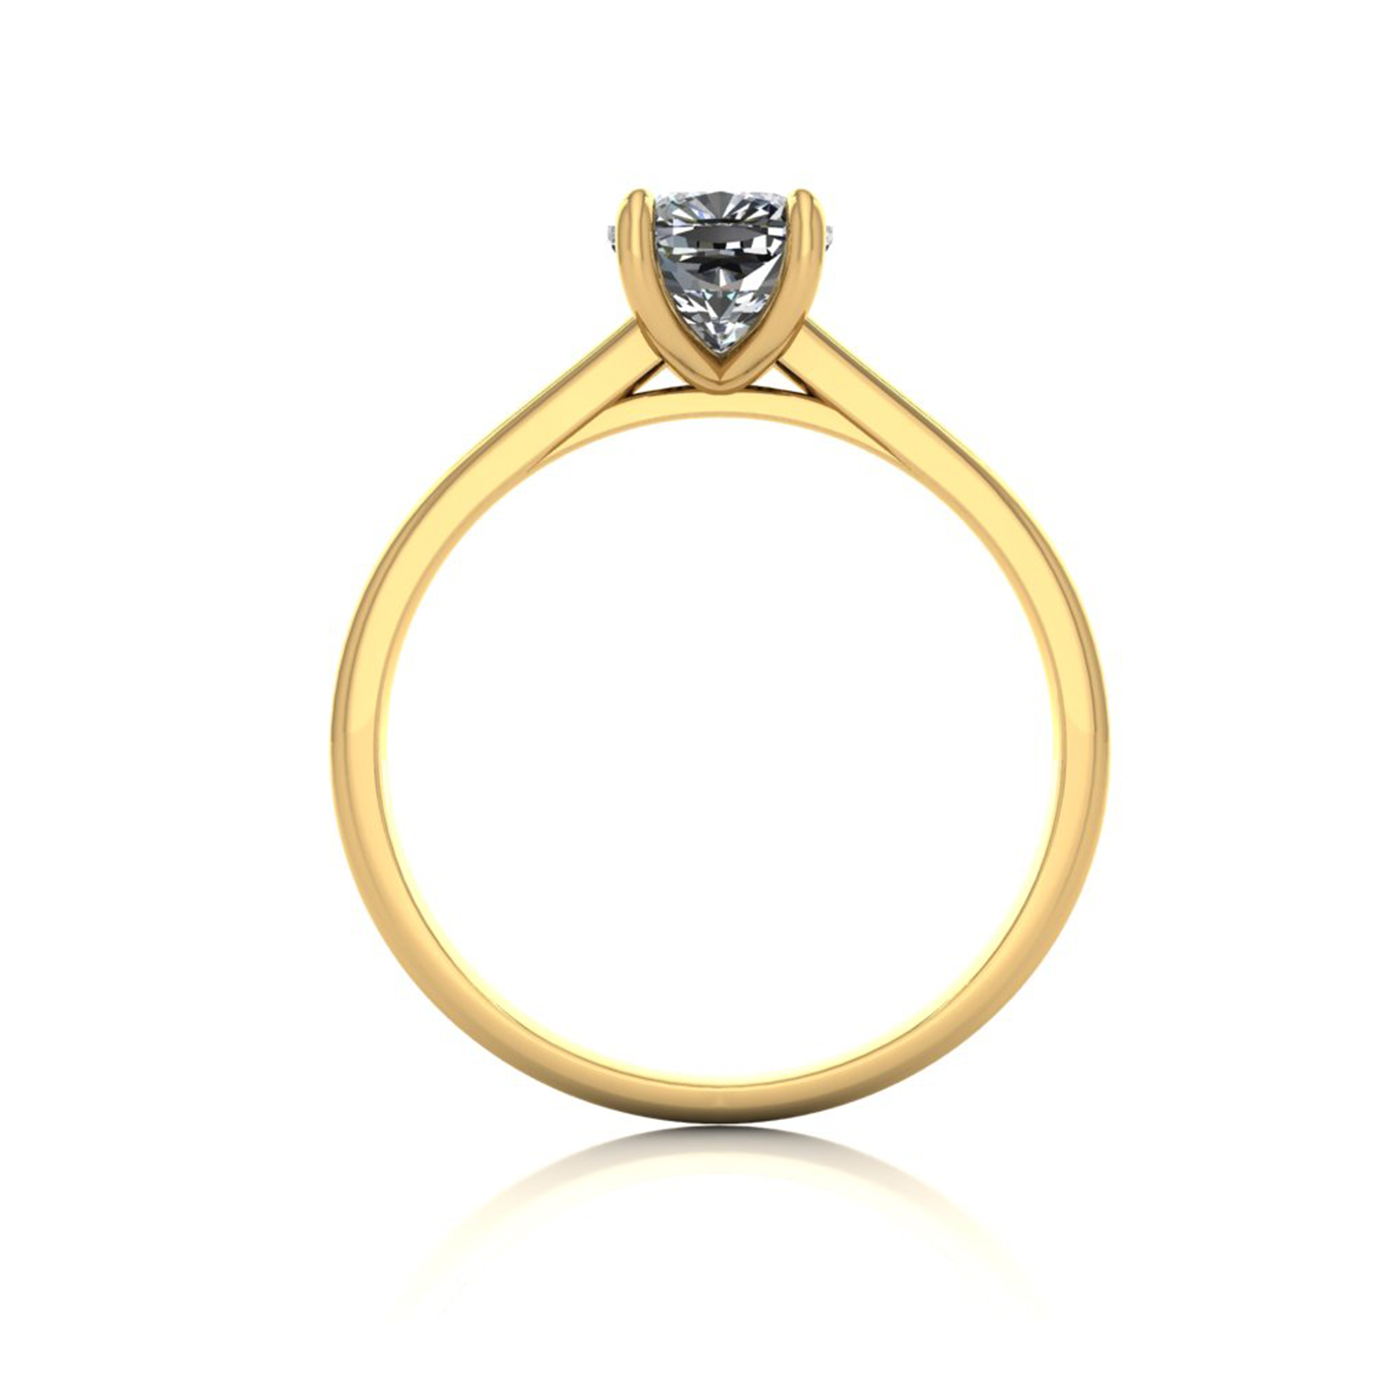 18K YELLOW GOLD 4 PRONGS SOLITAIRE CUSHION CUT DIAMOND ENGAGEMENT RING WITH WHISPER THIN BAND